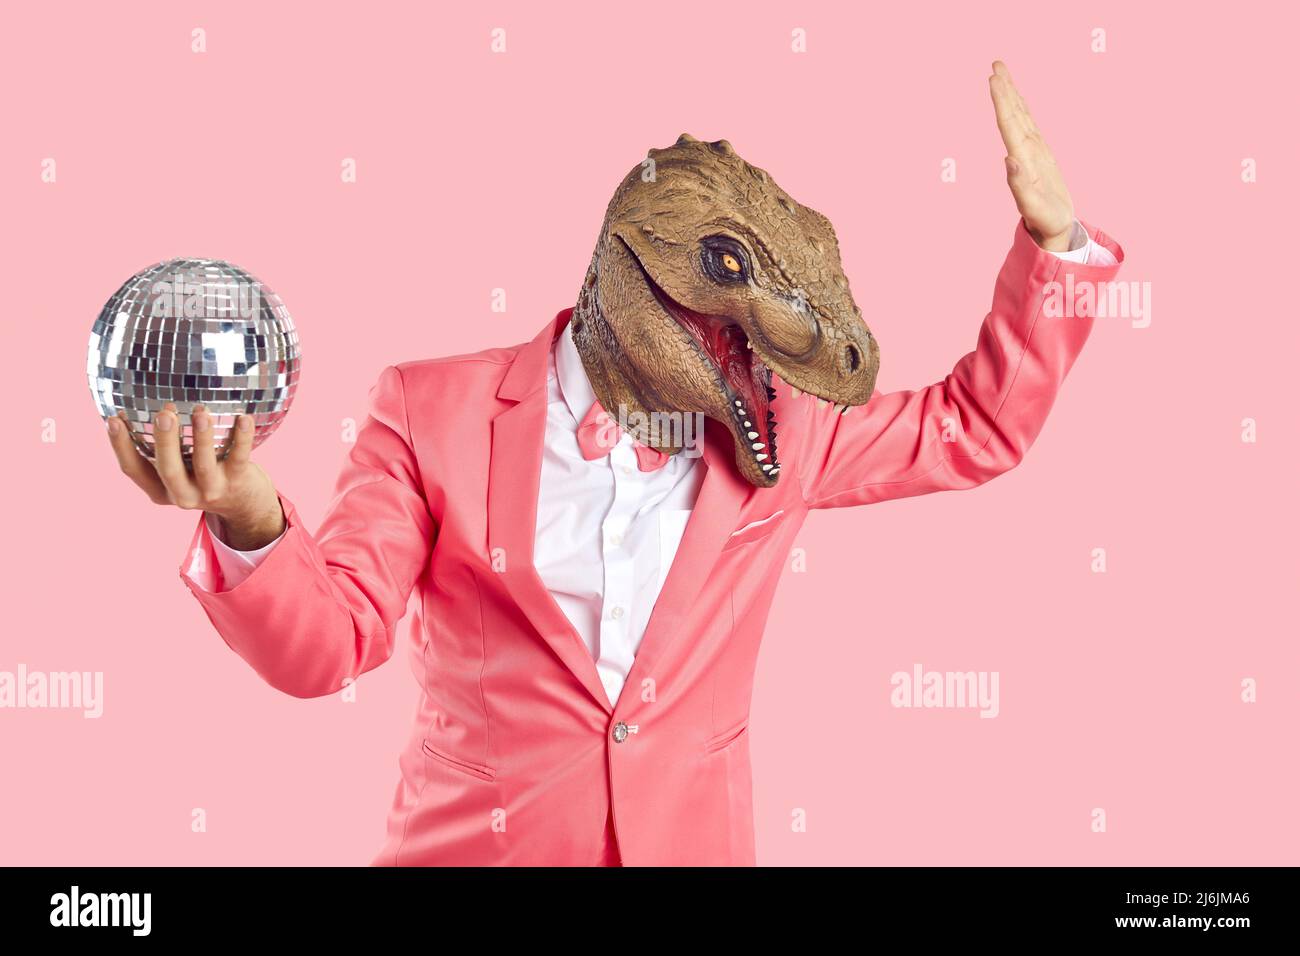 Fashionable man in dinosaur rubber mask with disco ball in his hand on pastel pink background. Stock Photo